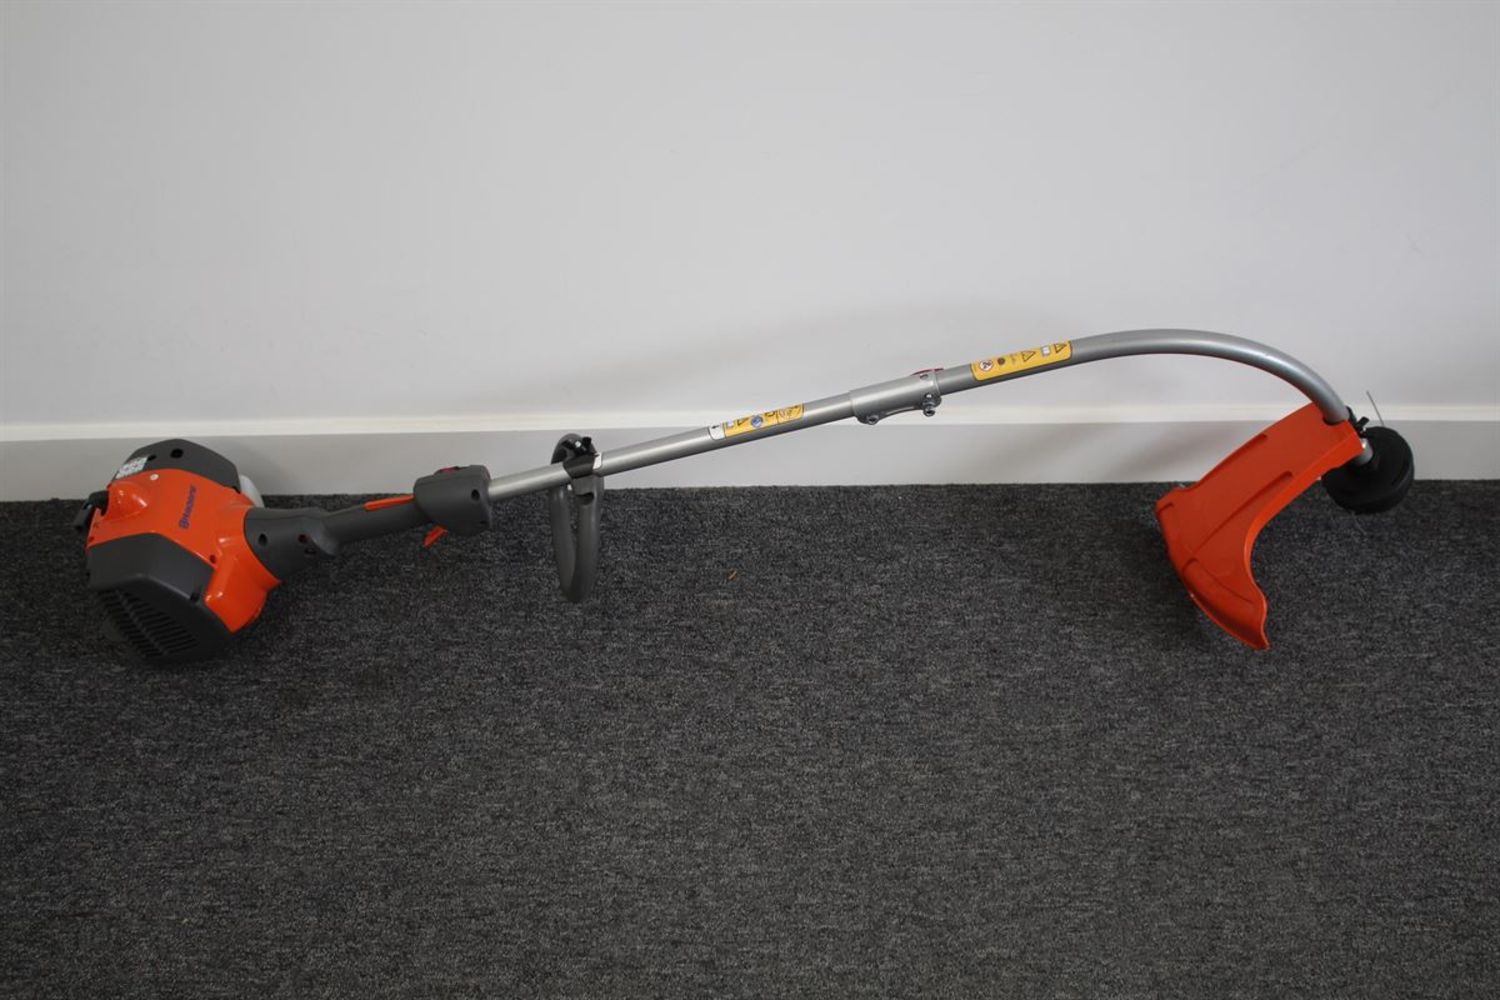 Due to Liquidation, Garden Equipment, Lawn Care Equipment & Tools to include Husqvarna Chainsaws, Grass Trimmers,  & More